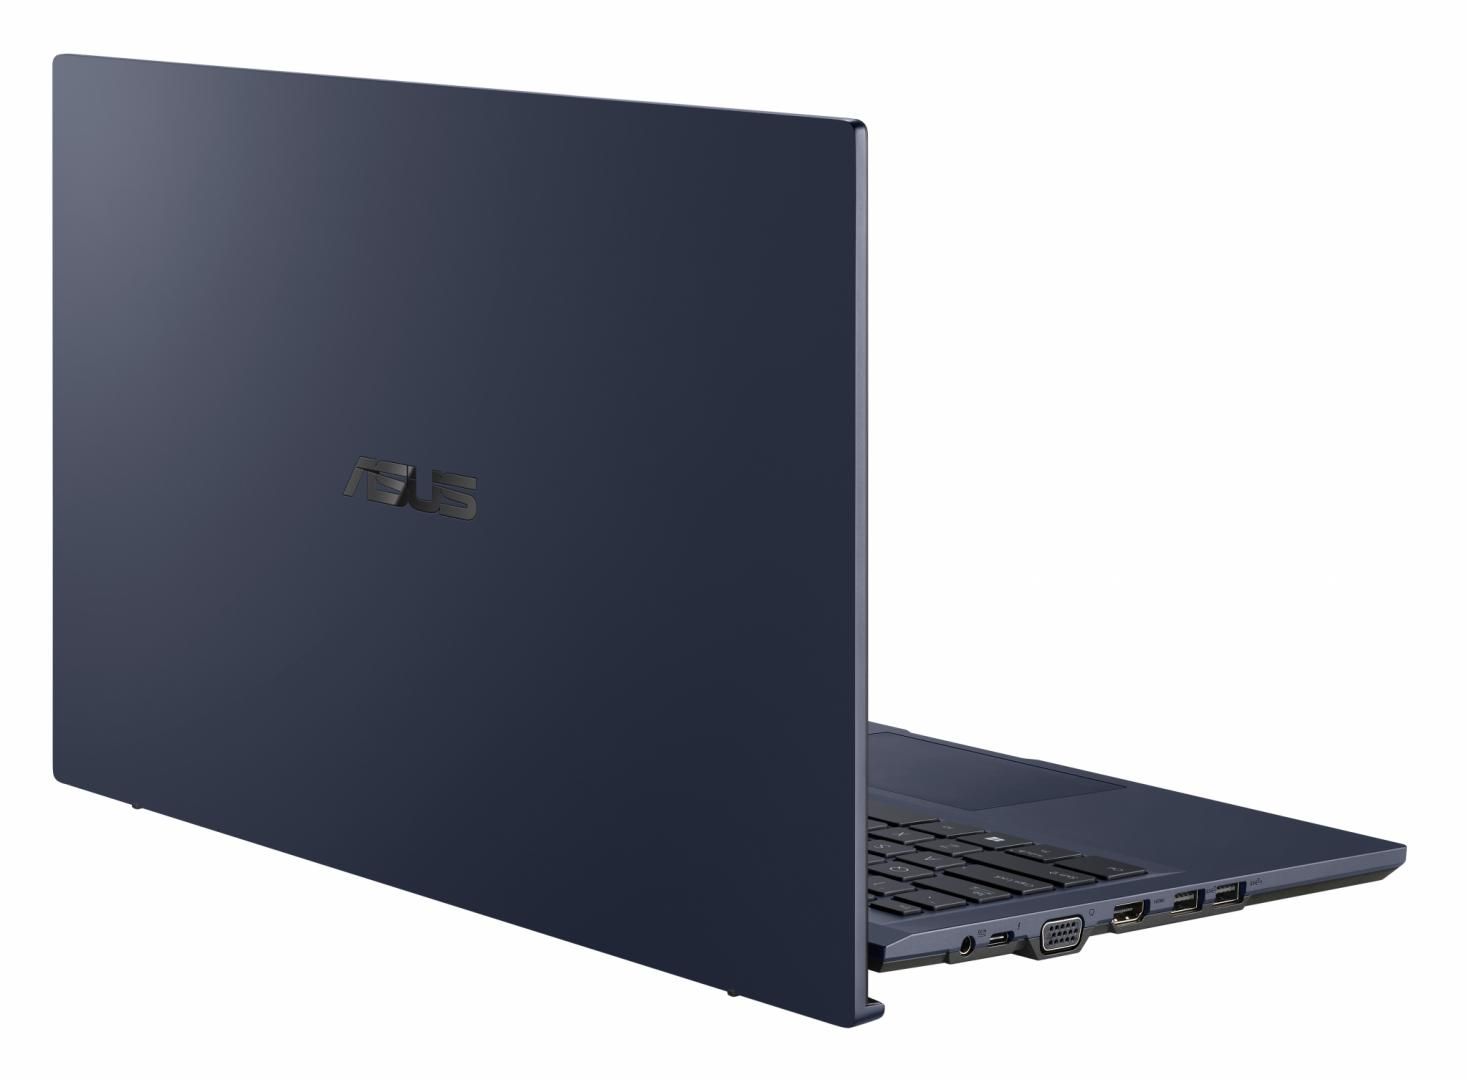 Laptop ASUS Business ExpertBook B1500CEPE-BQ0563R, 15.0-inch, FHD (1920 x 1080) 16:9, Procesor Intel® Core™ i5-1135G7 Processor 2.4 GHz (8M Cache, up to 4.2 GHz, 4 cores), 8GB DDR4, 512GB SSD, NVIDIA® GeForce® MX330, Windows 10 Pro, Star Black_2